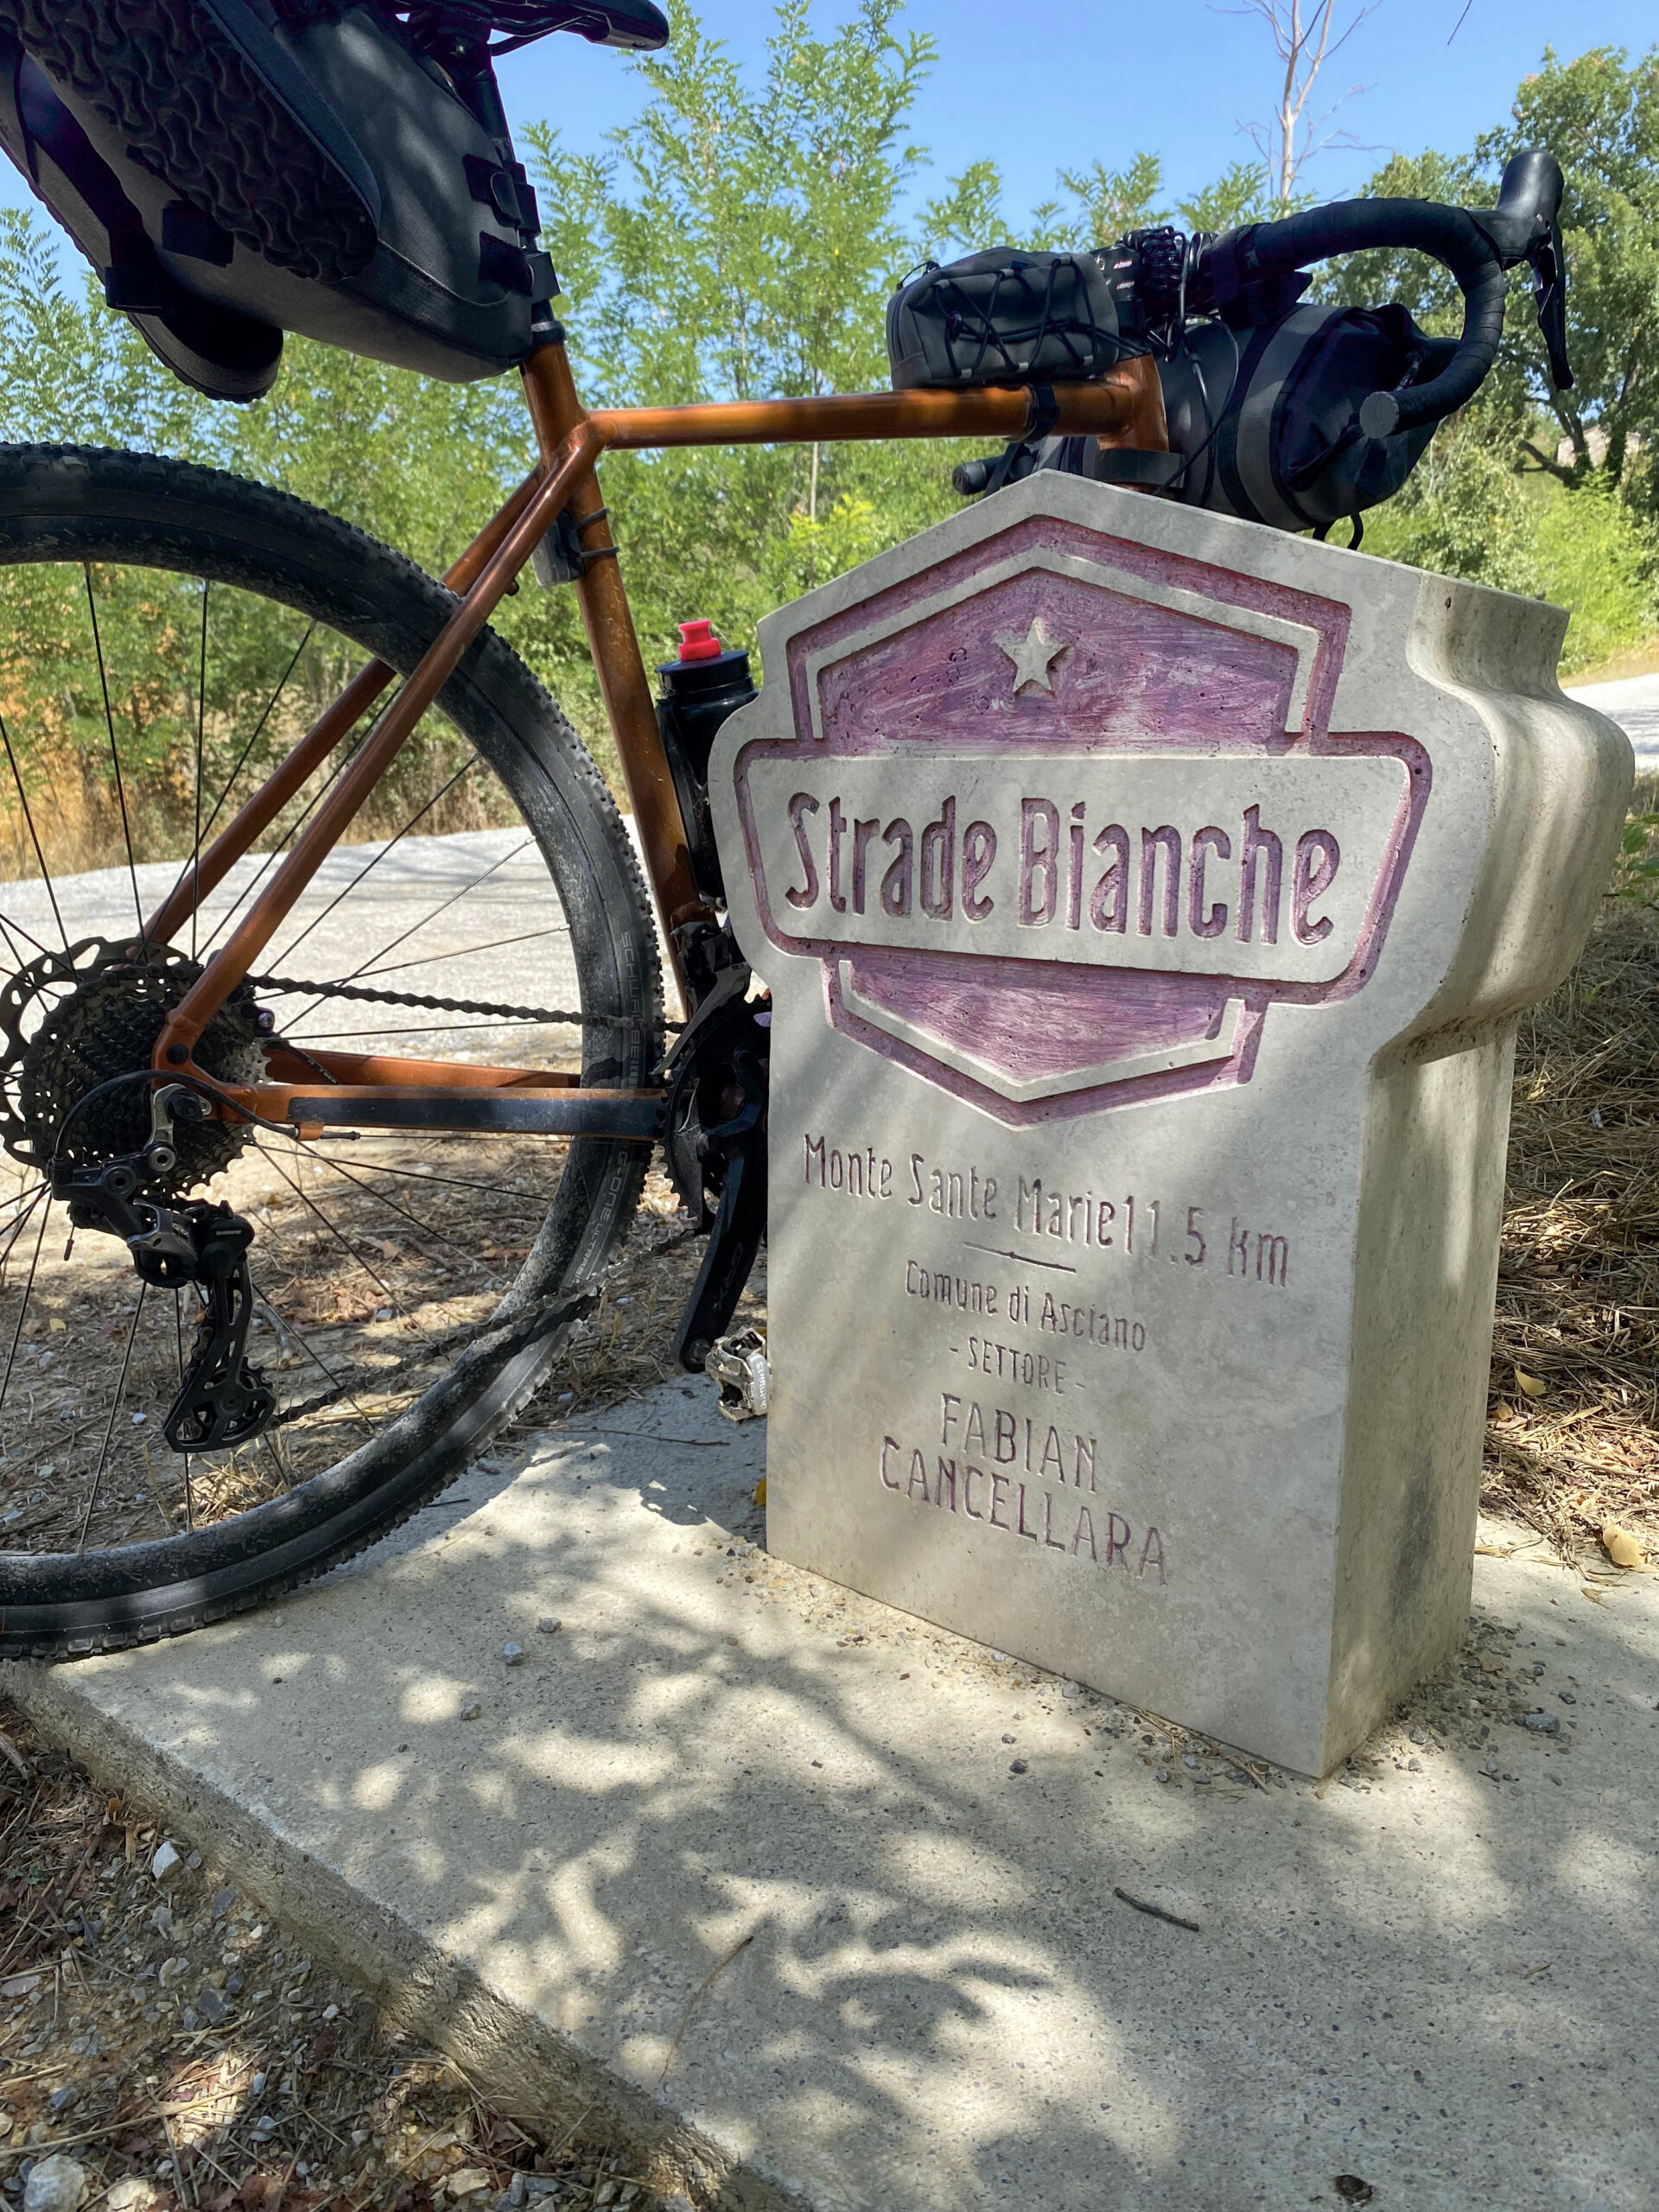 Strade Bianche, the southest north classic